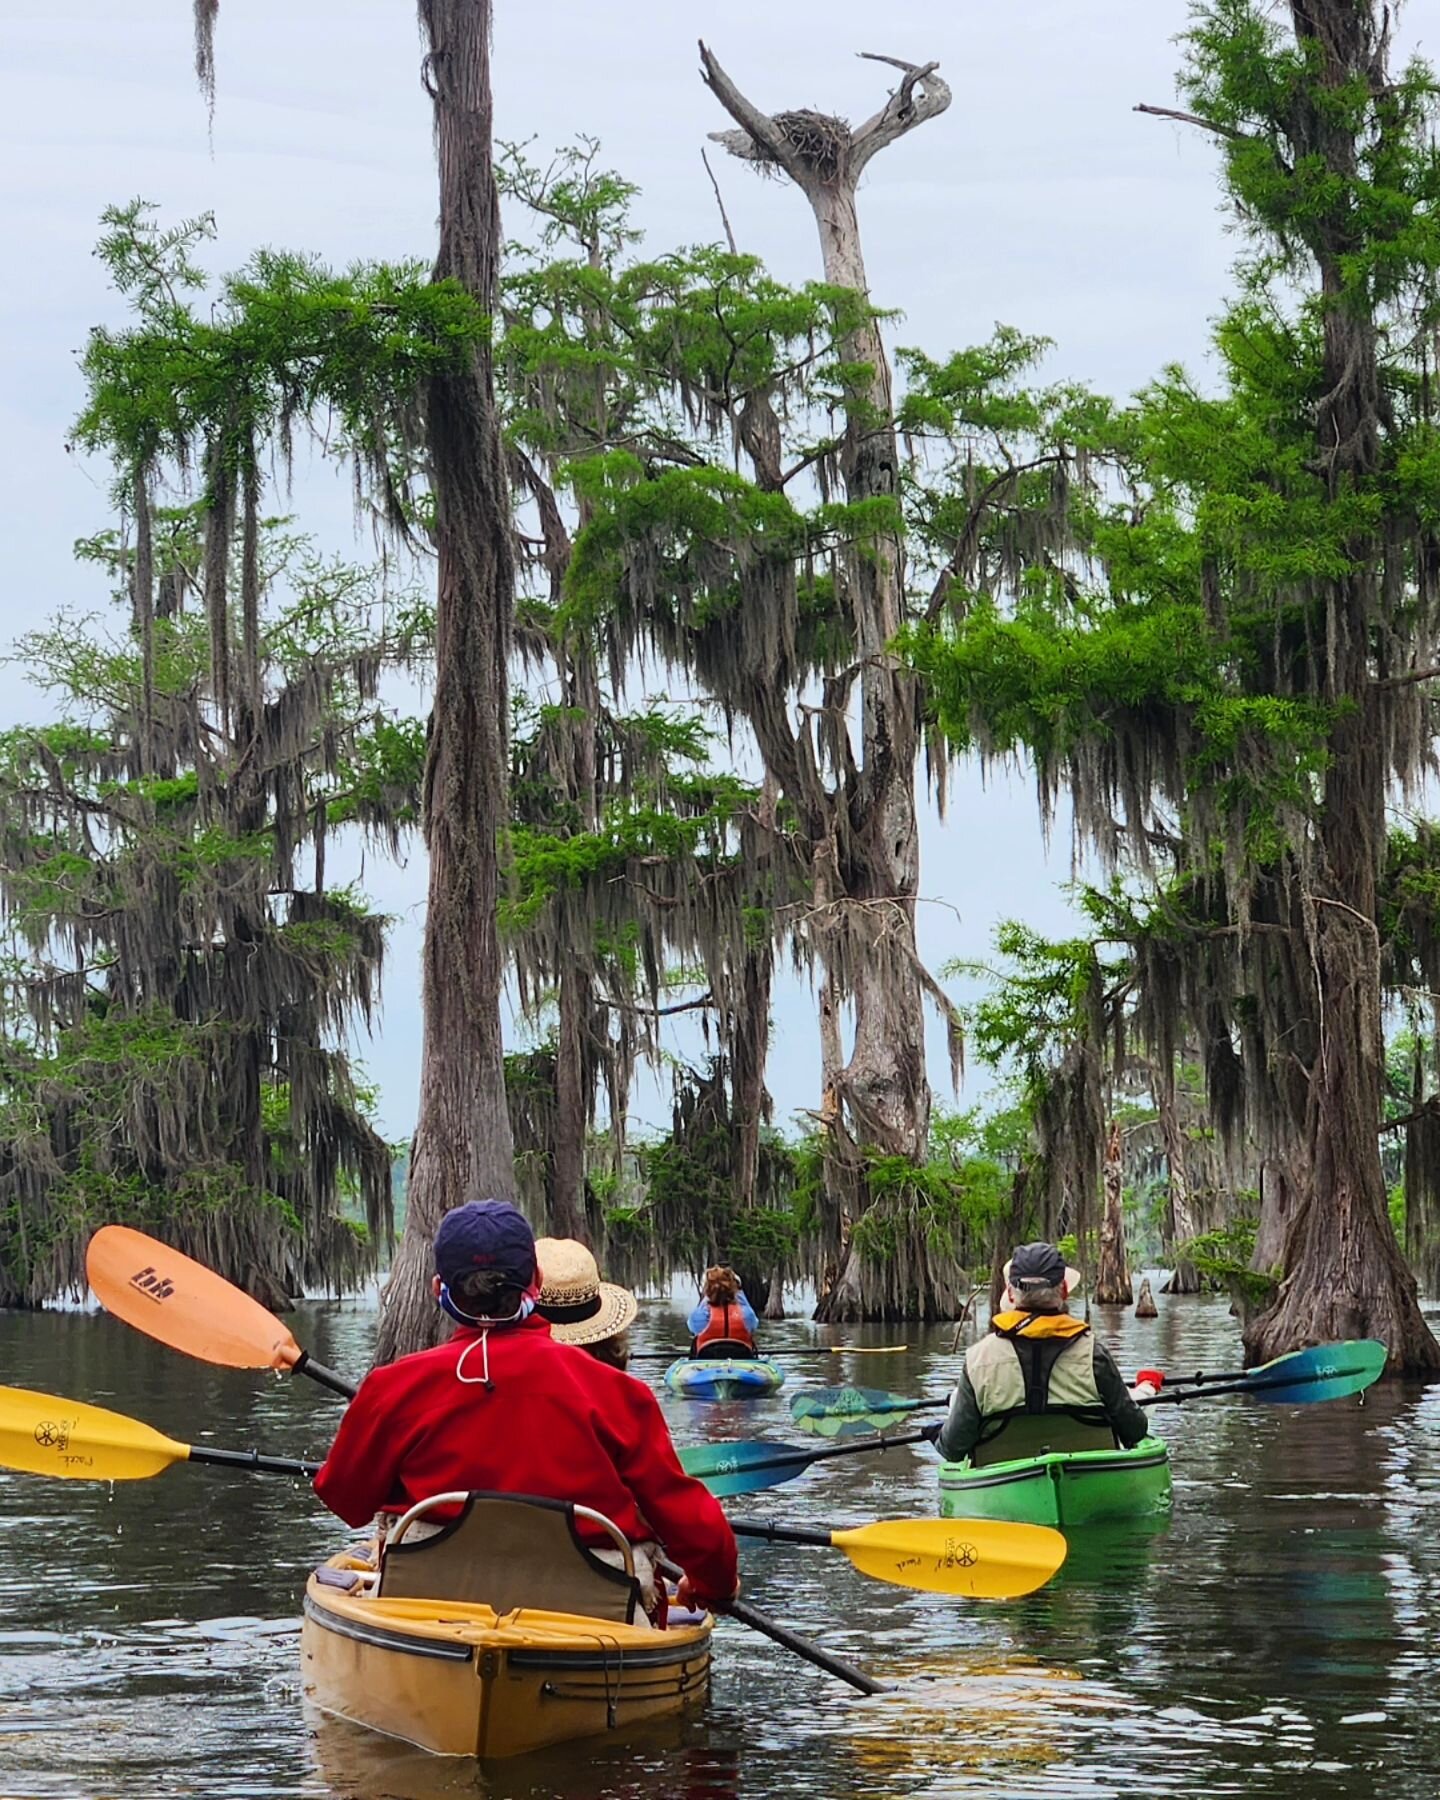 A wonderful kayak adventure out in Lake Martin, Louisiana as Guide Sweep for Janenne @ducinaltumkayak! With guests from England and from Conneticut, we paddled through the dreamy Louisiana Cypress and Tupelo trees and saw a lot of colorful birds, all